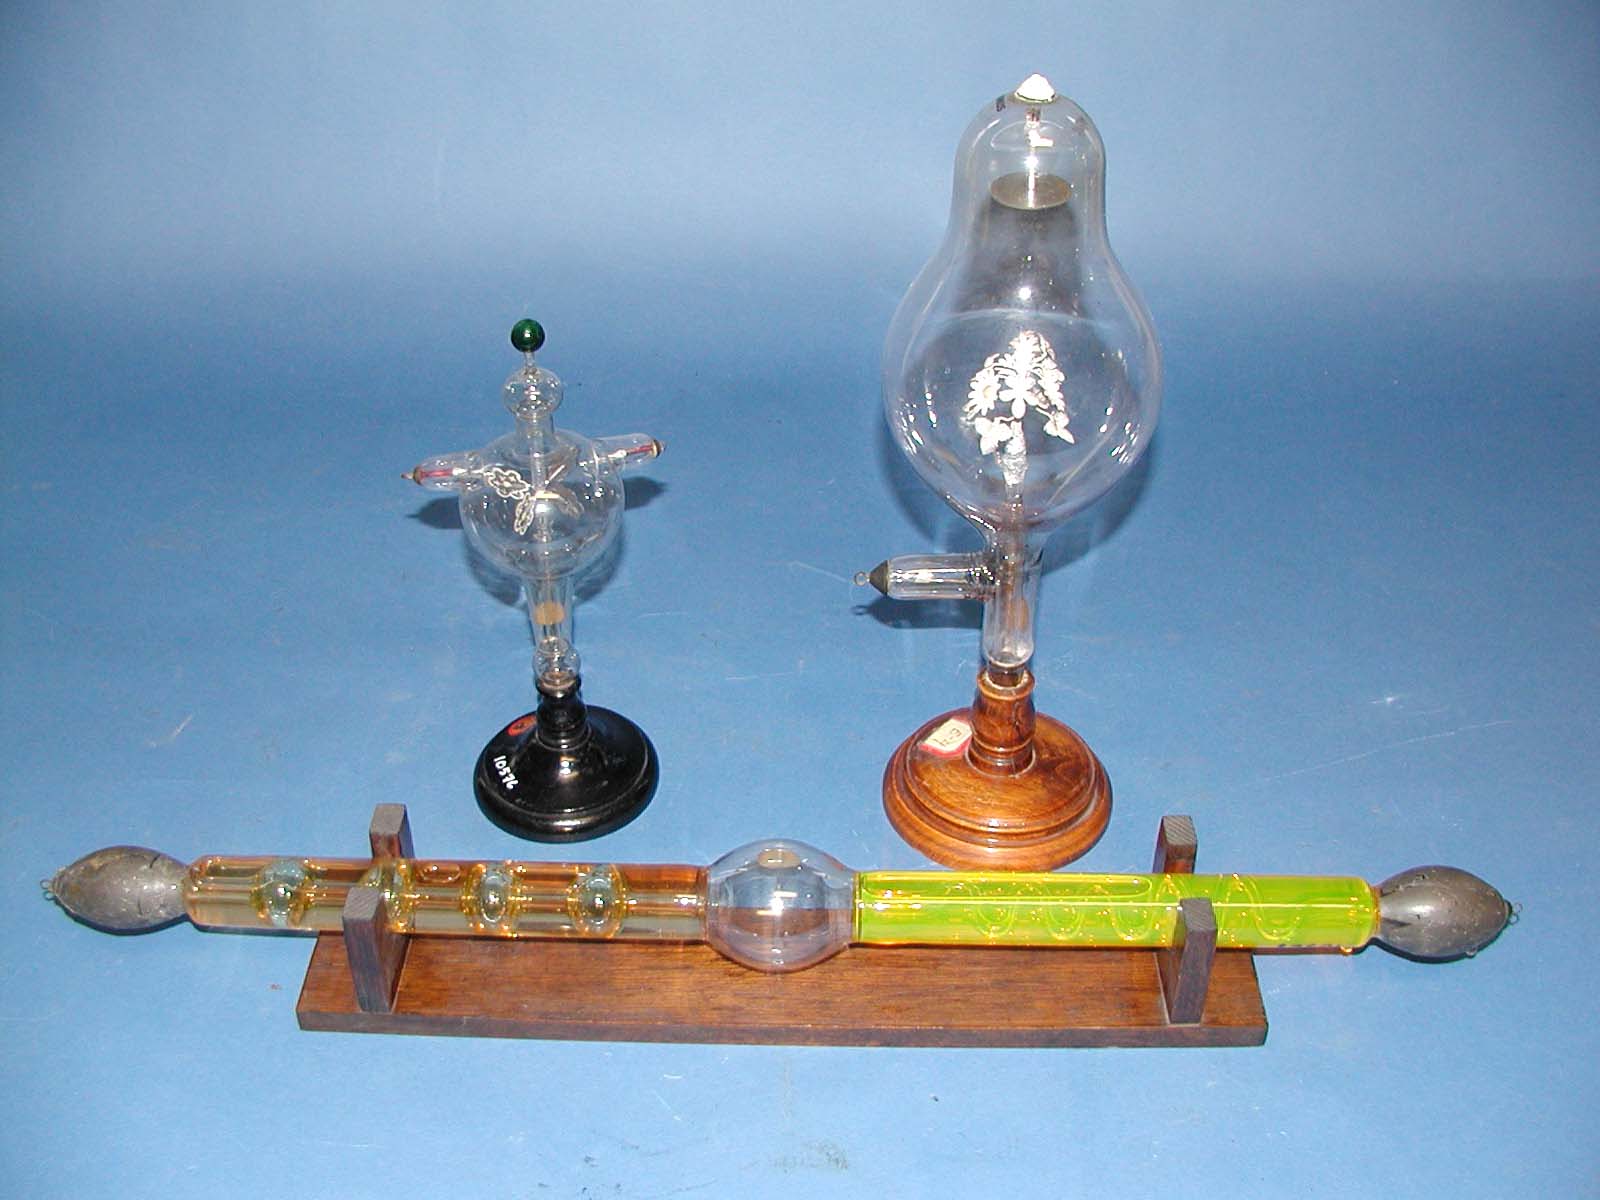 Geissler and Crookes Tubes